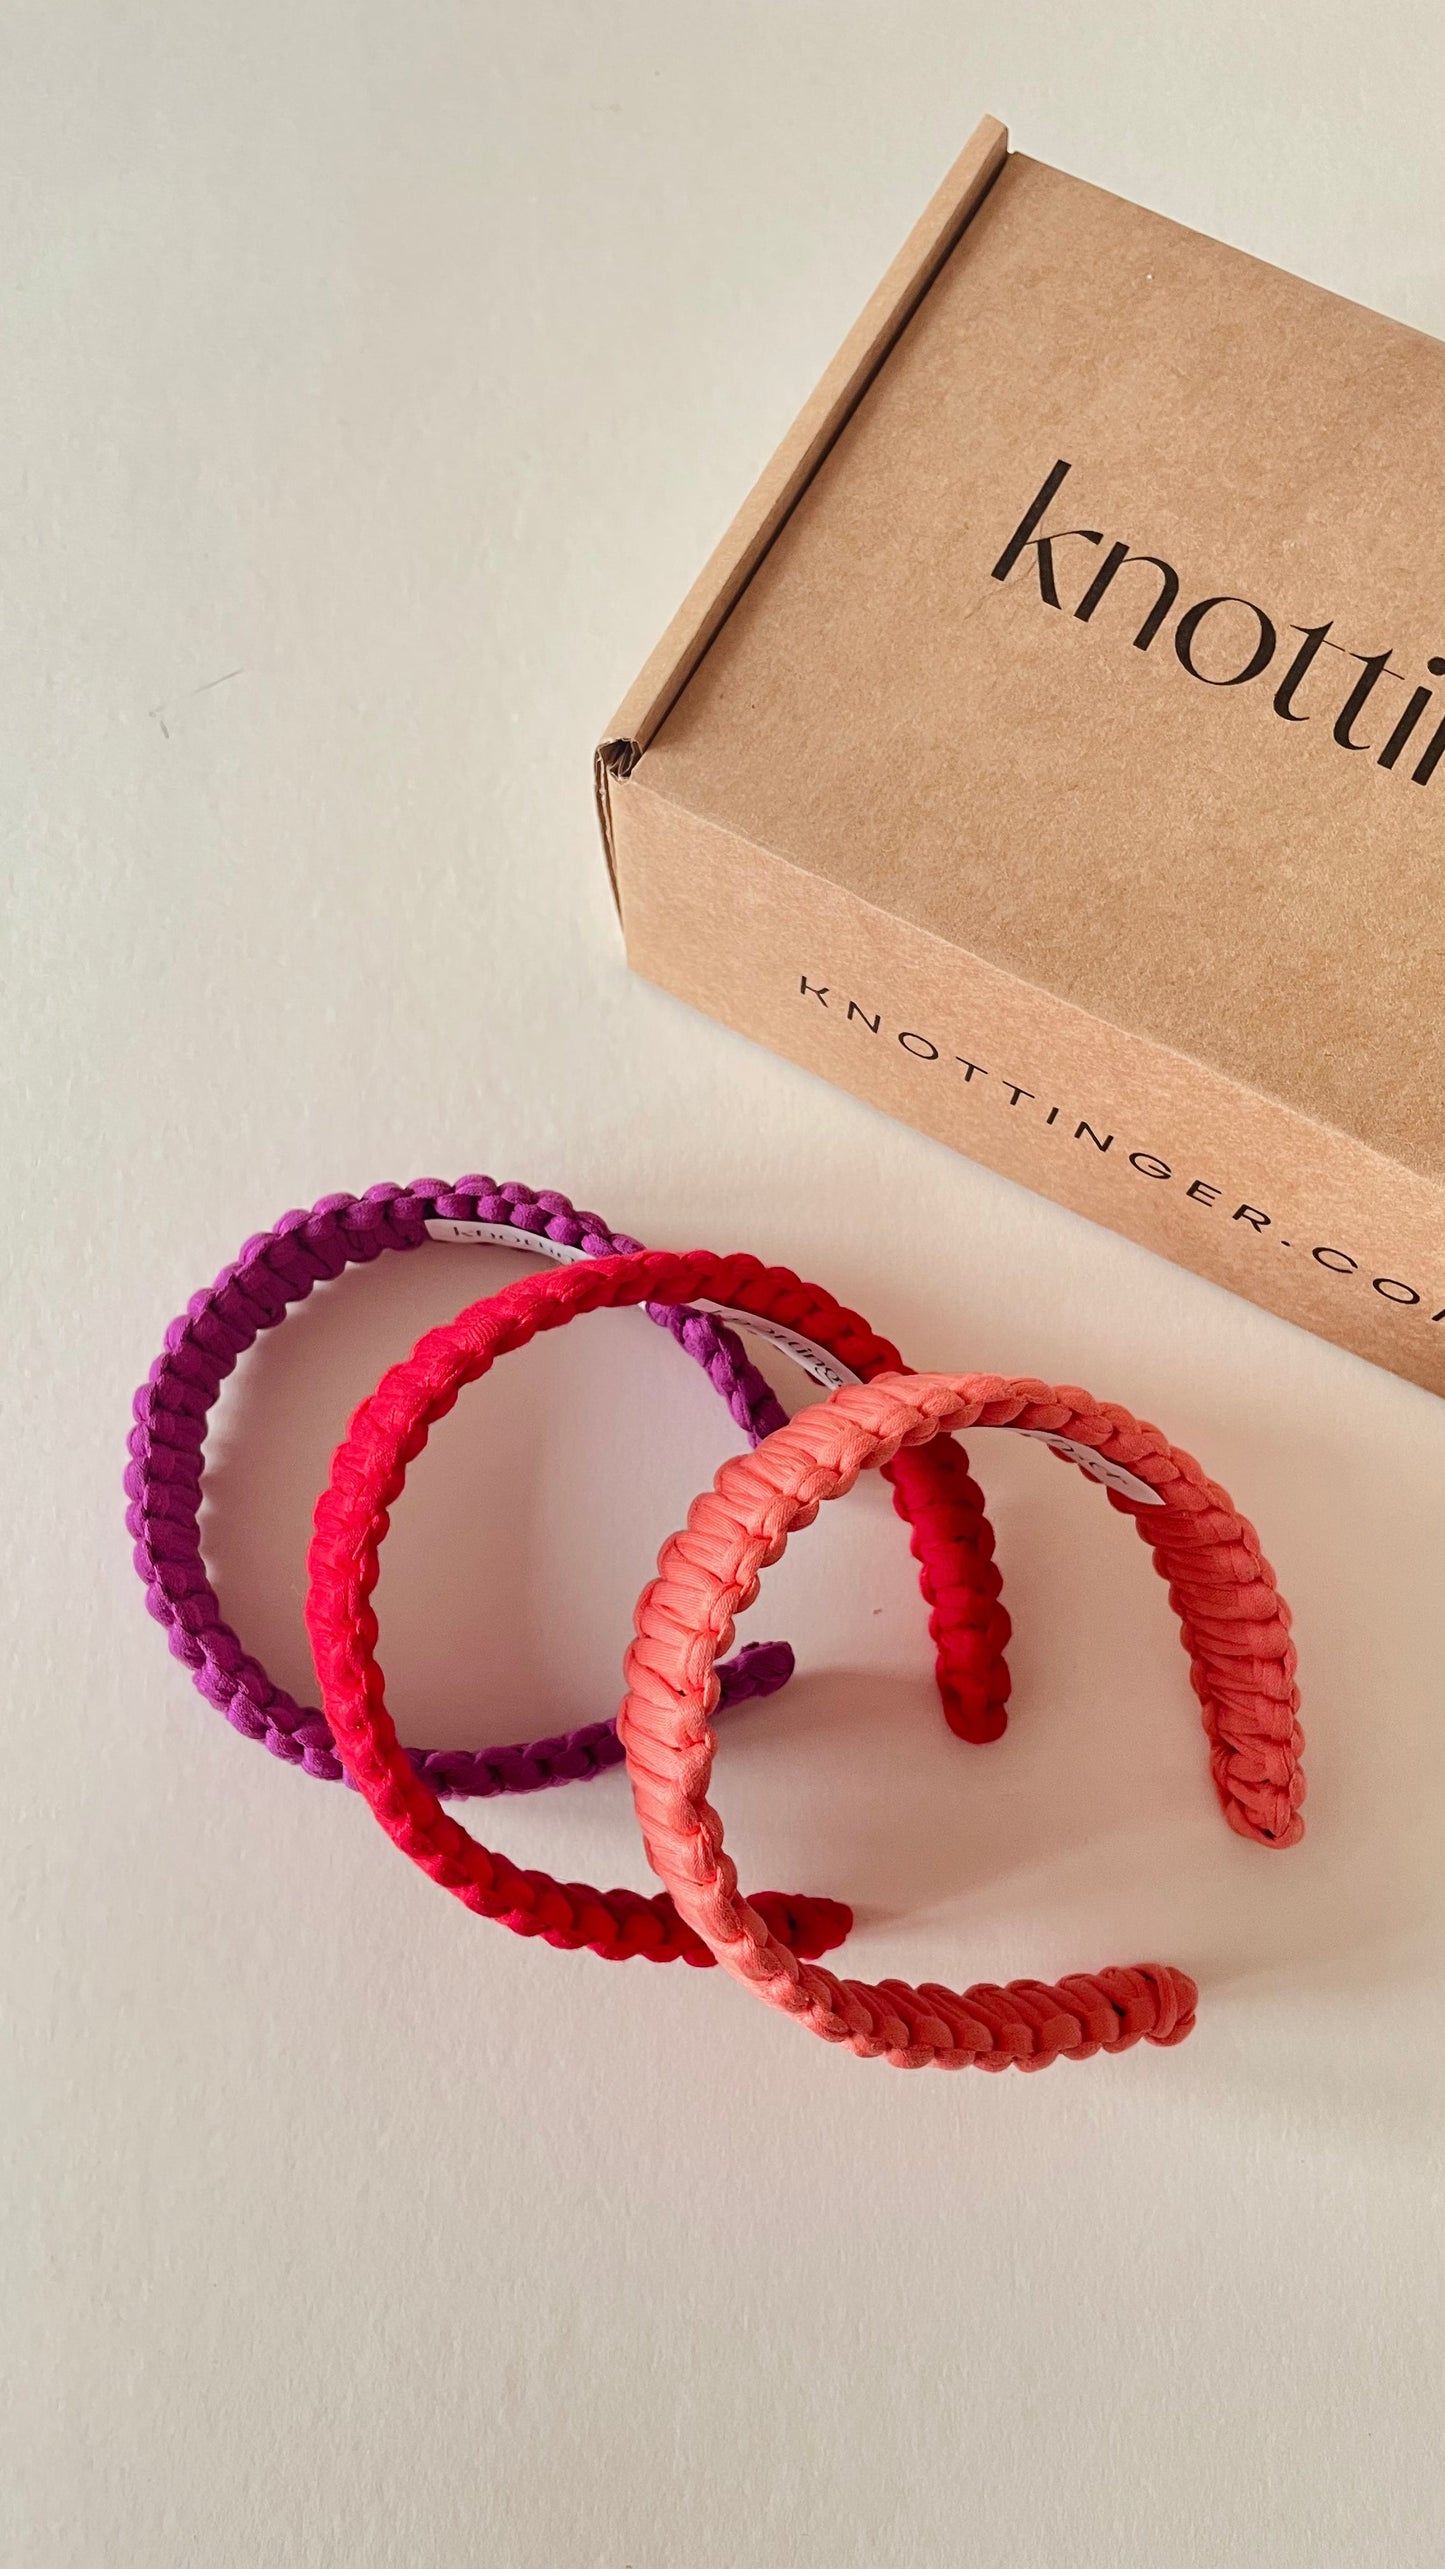 Super seconds - Recycled cotton knotted headband - Knottinger